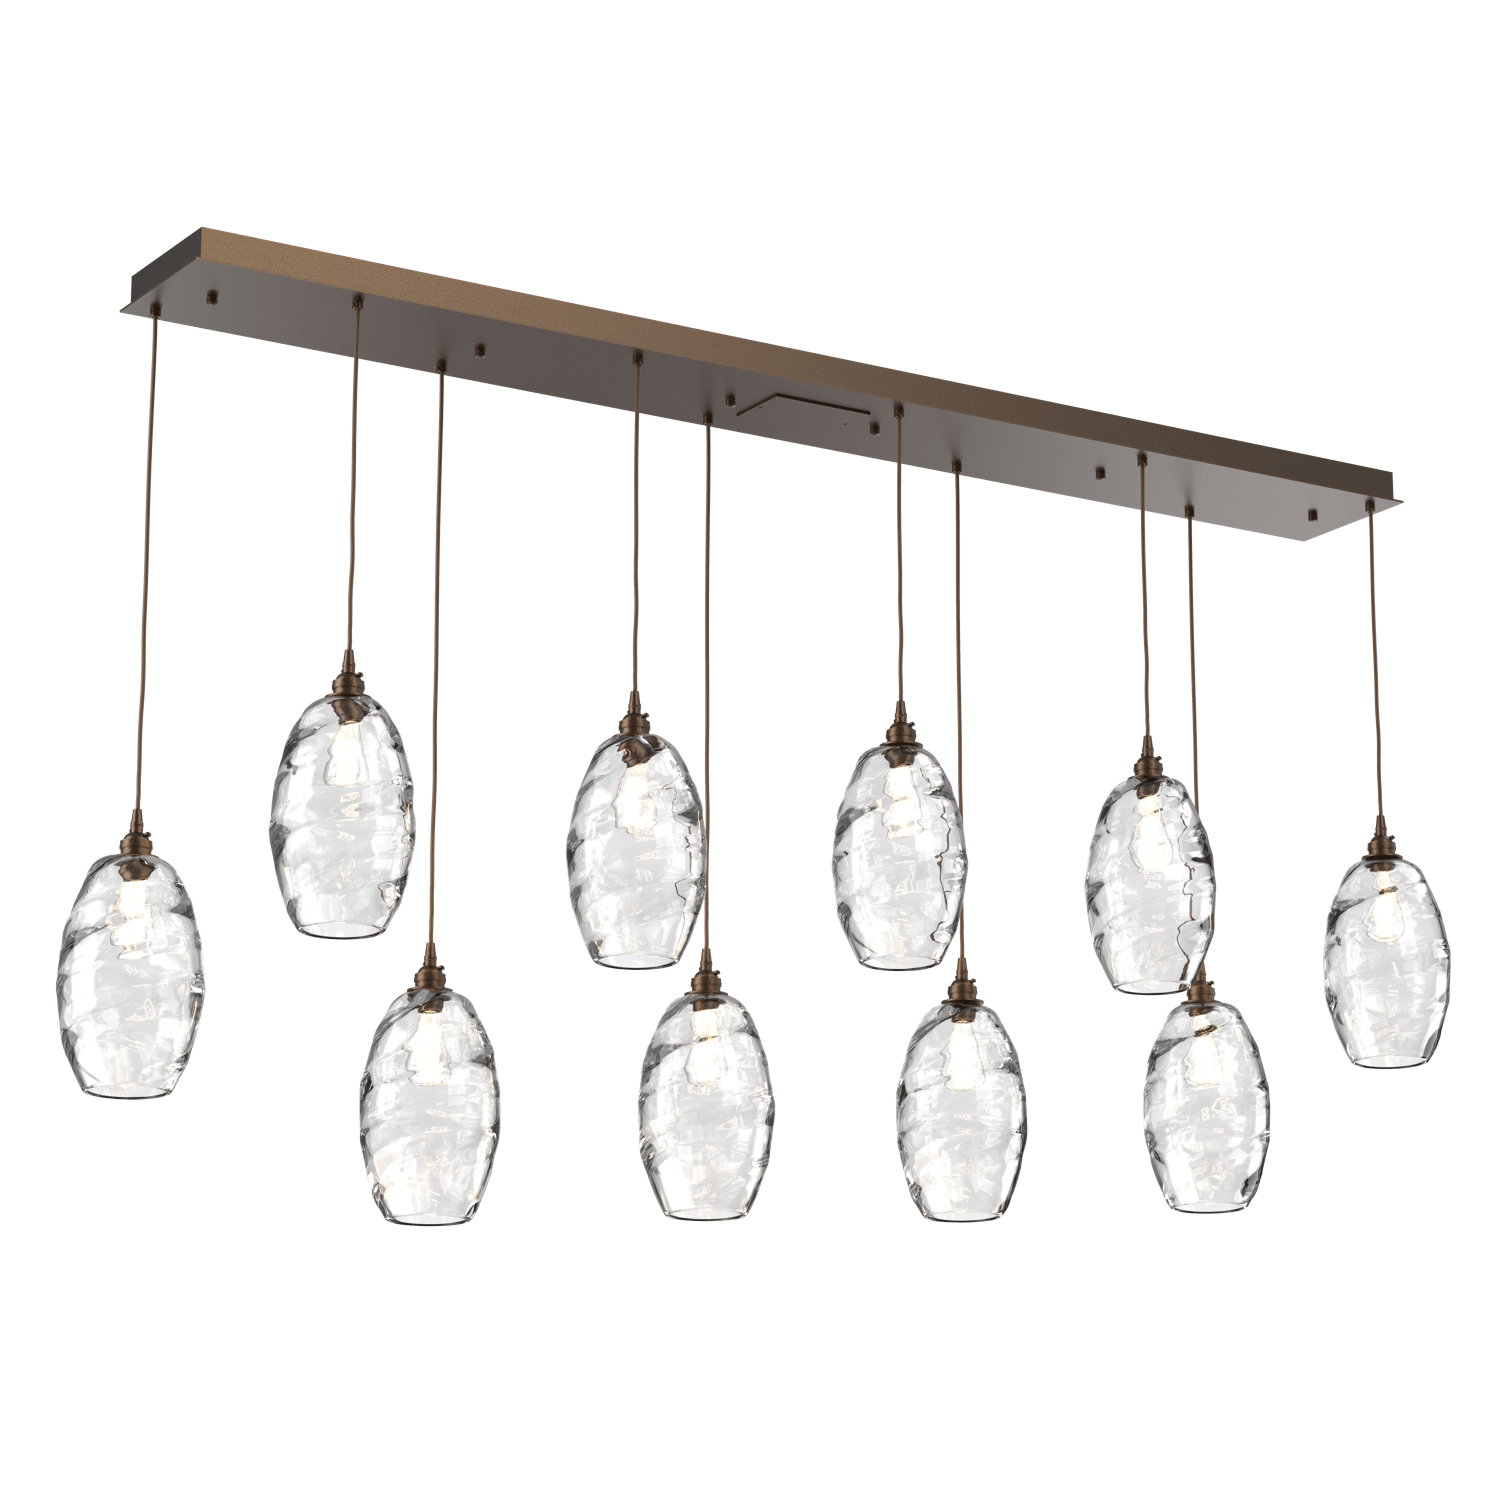 PLB0035-10-FB-OC-Hammerton-Studio-Optic-Blown-Glass-Elisse-10-light-linear-pendant-chandelier-with-flat-bronze-finish-and-optic-clear-blown-glass-shades-and-incandescent-lamping